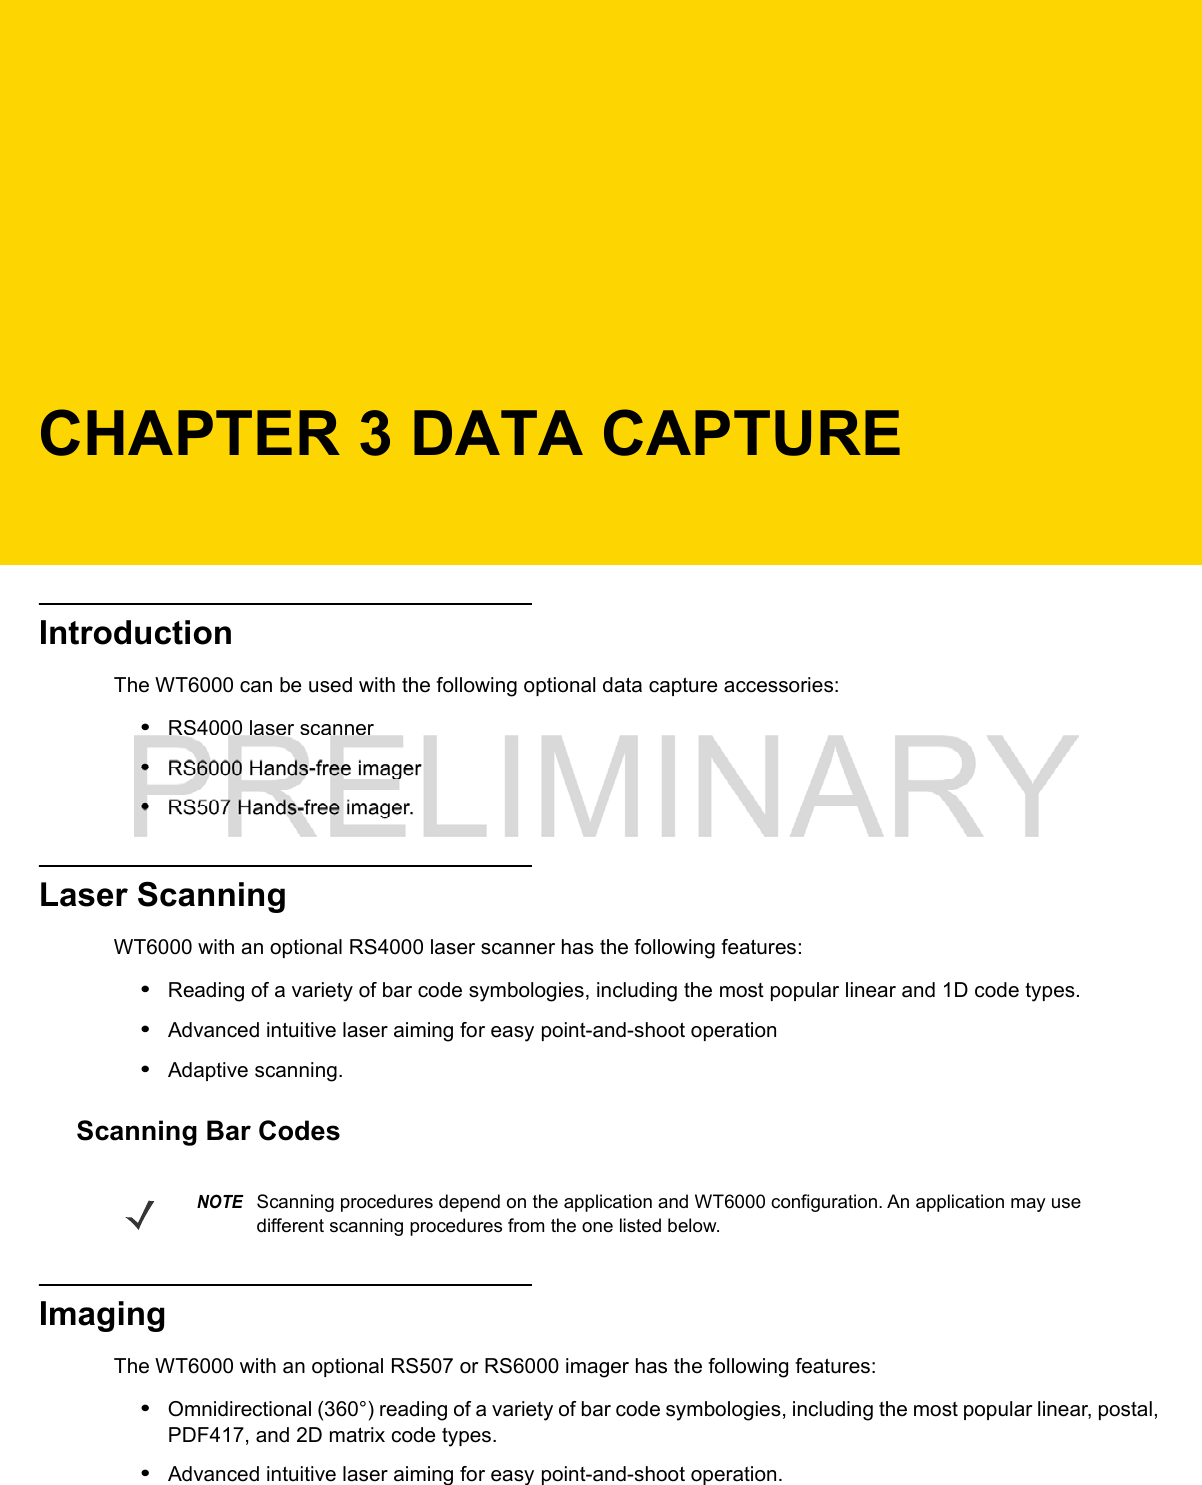 CHAPTER 3 DATA CAPTUREIntroductionThe WT6000 can be used with the following optional data capture accessories:•RS4000 laser scanner•RS6000 Hands-free imager•RS507 Hands-free imager.Laser ScanningWT6000 with an optional RS4000 laser scanner has the following features:•Reading of a variety of bar code symbologies, including the most popular linear and 1D code types.•Advanced intuitive laser aiming for easy point-and-shoot operation•Adaptive scanning.Scanning Bar CodesImagingThe WT6000 with an optional RS507 or RS6000 imager has the following features:•Omnidirectional (360°) reading of a variety of bar code symbologies, including the most popular linear, postal, PDF417, and 2D matrix code types.•Advanced intuitive laser aiming for easy point-and-shoot operation.NOTEScanning procedures depend on the application and WT6000 configuration. An application may use different scanning procedures from the one listed below.